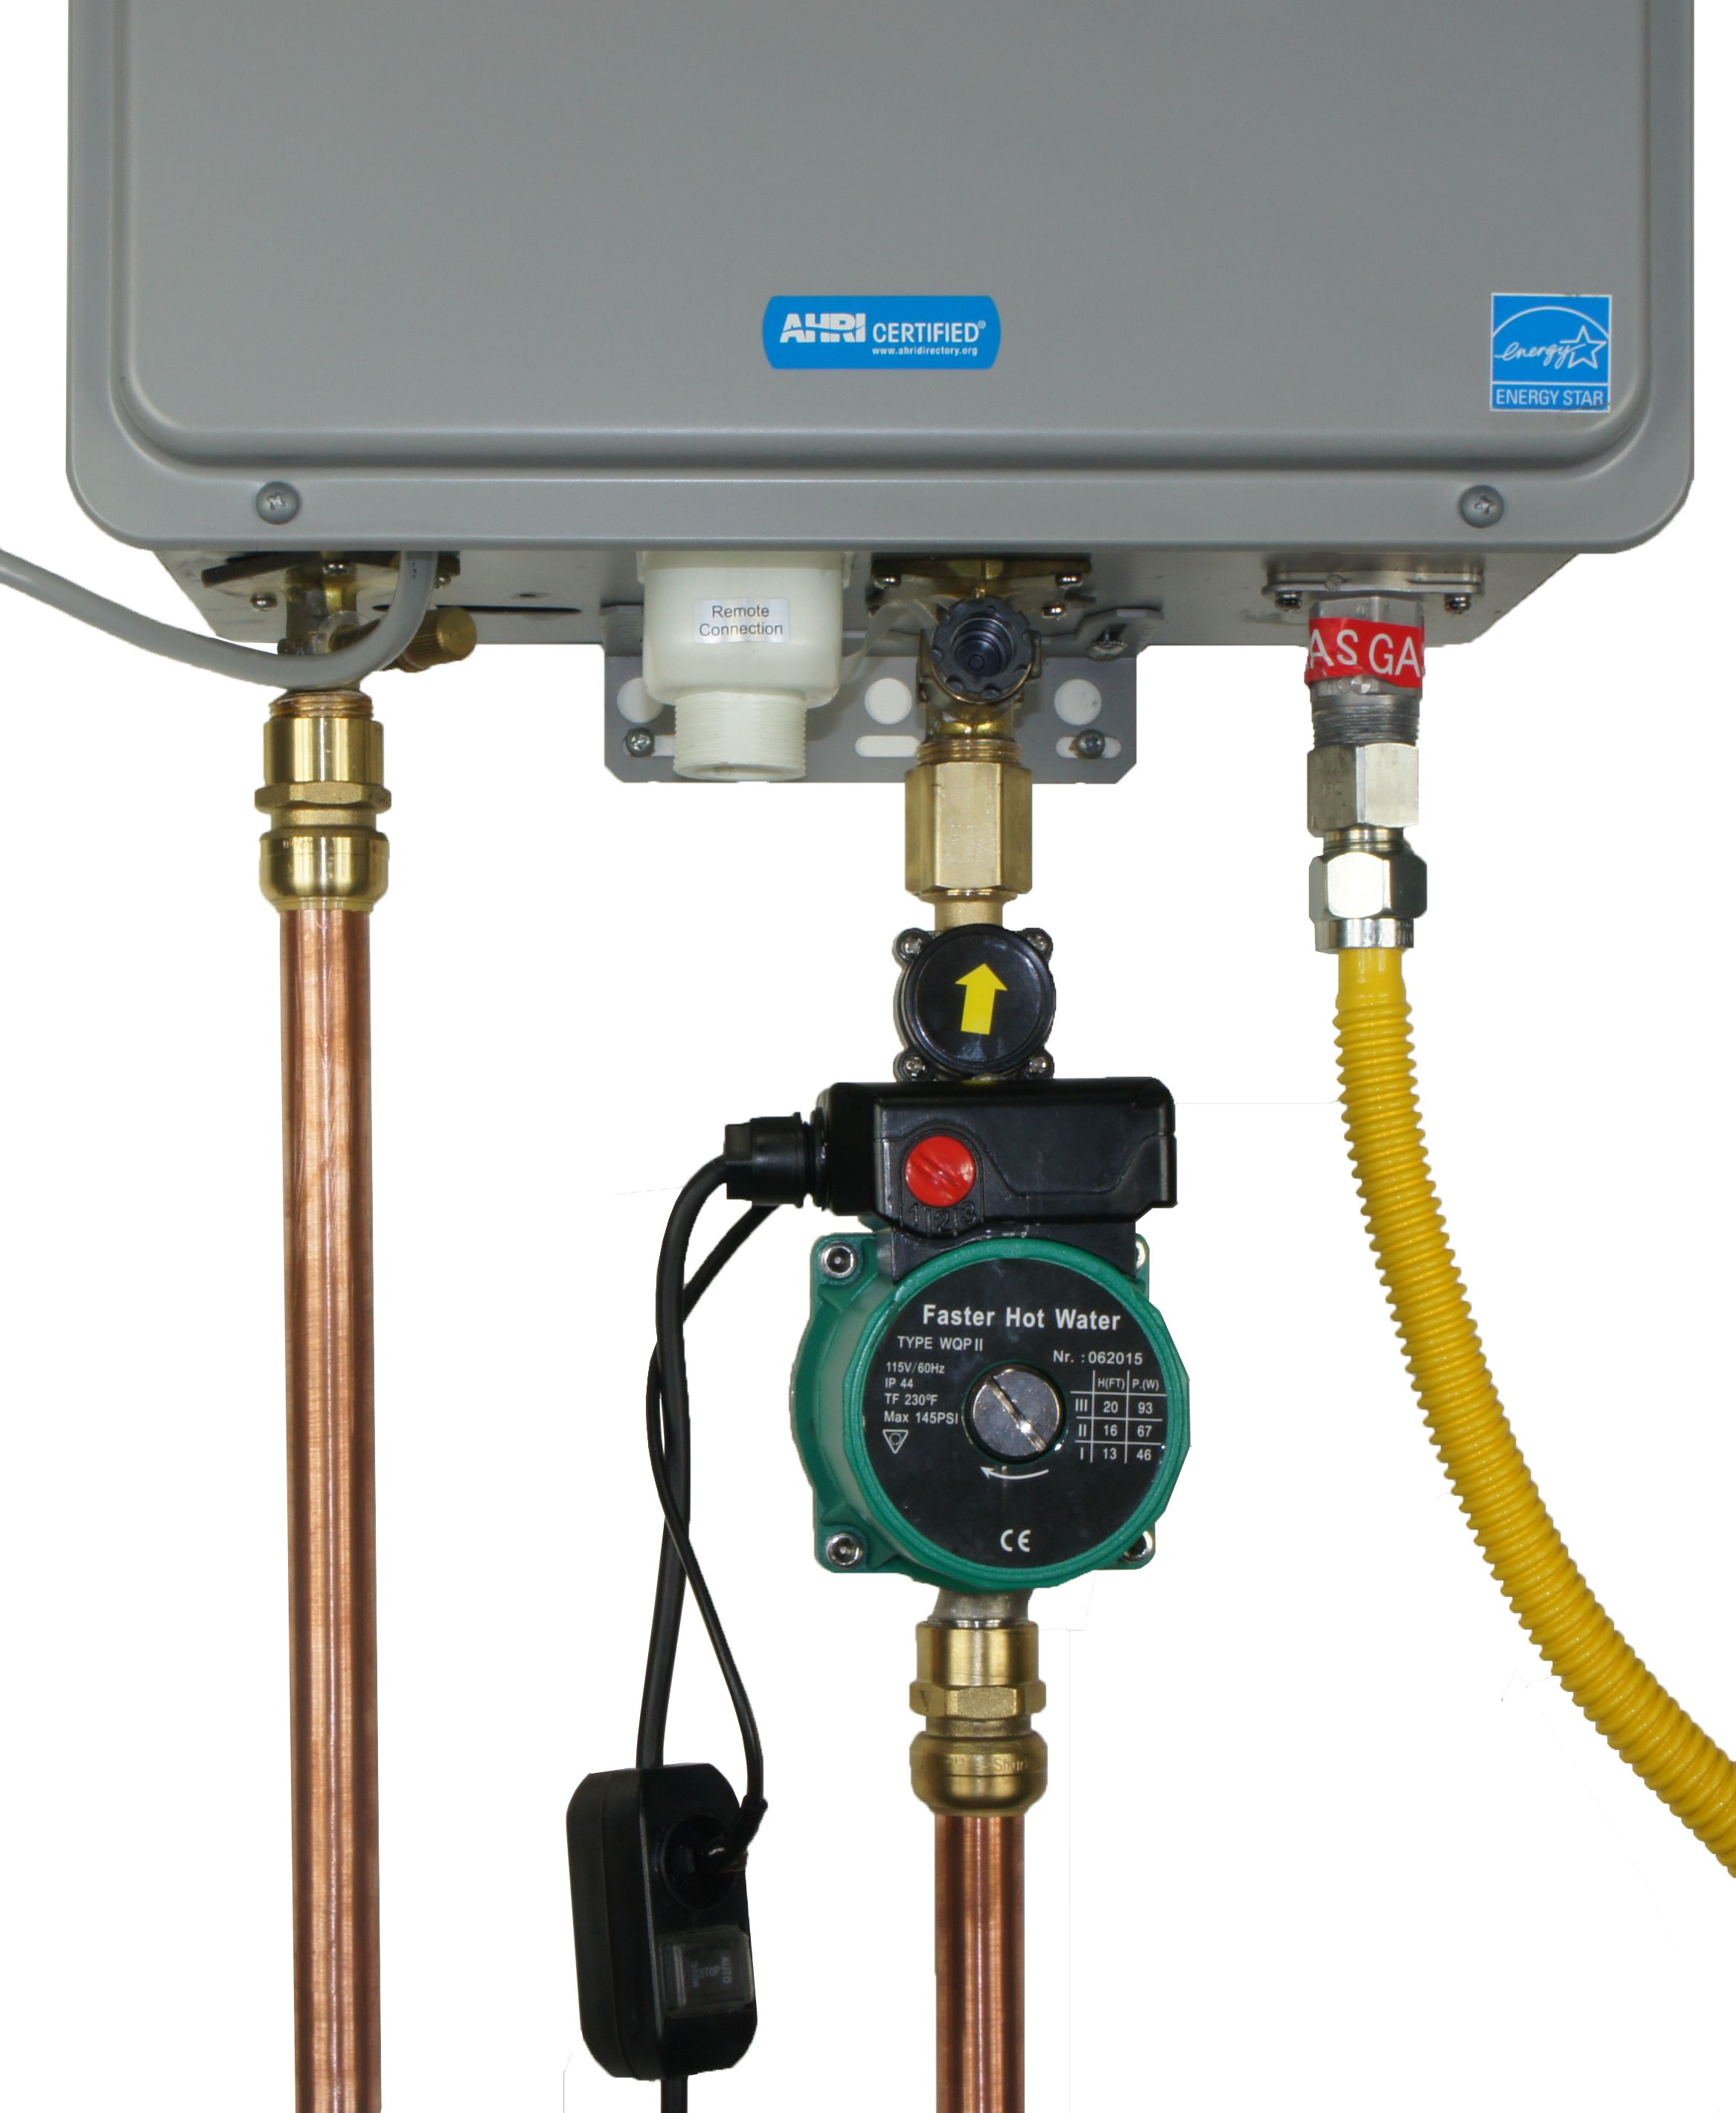 Image of a tankless water heater